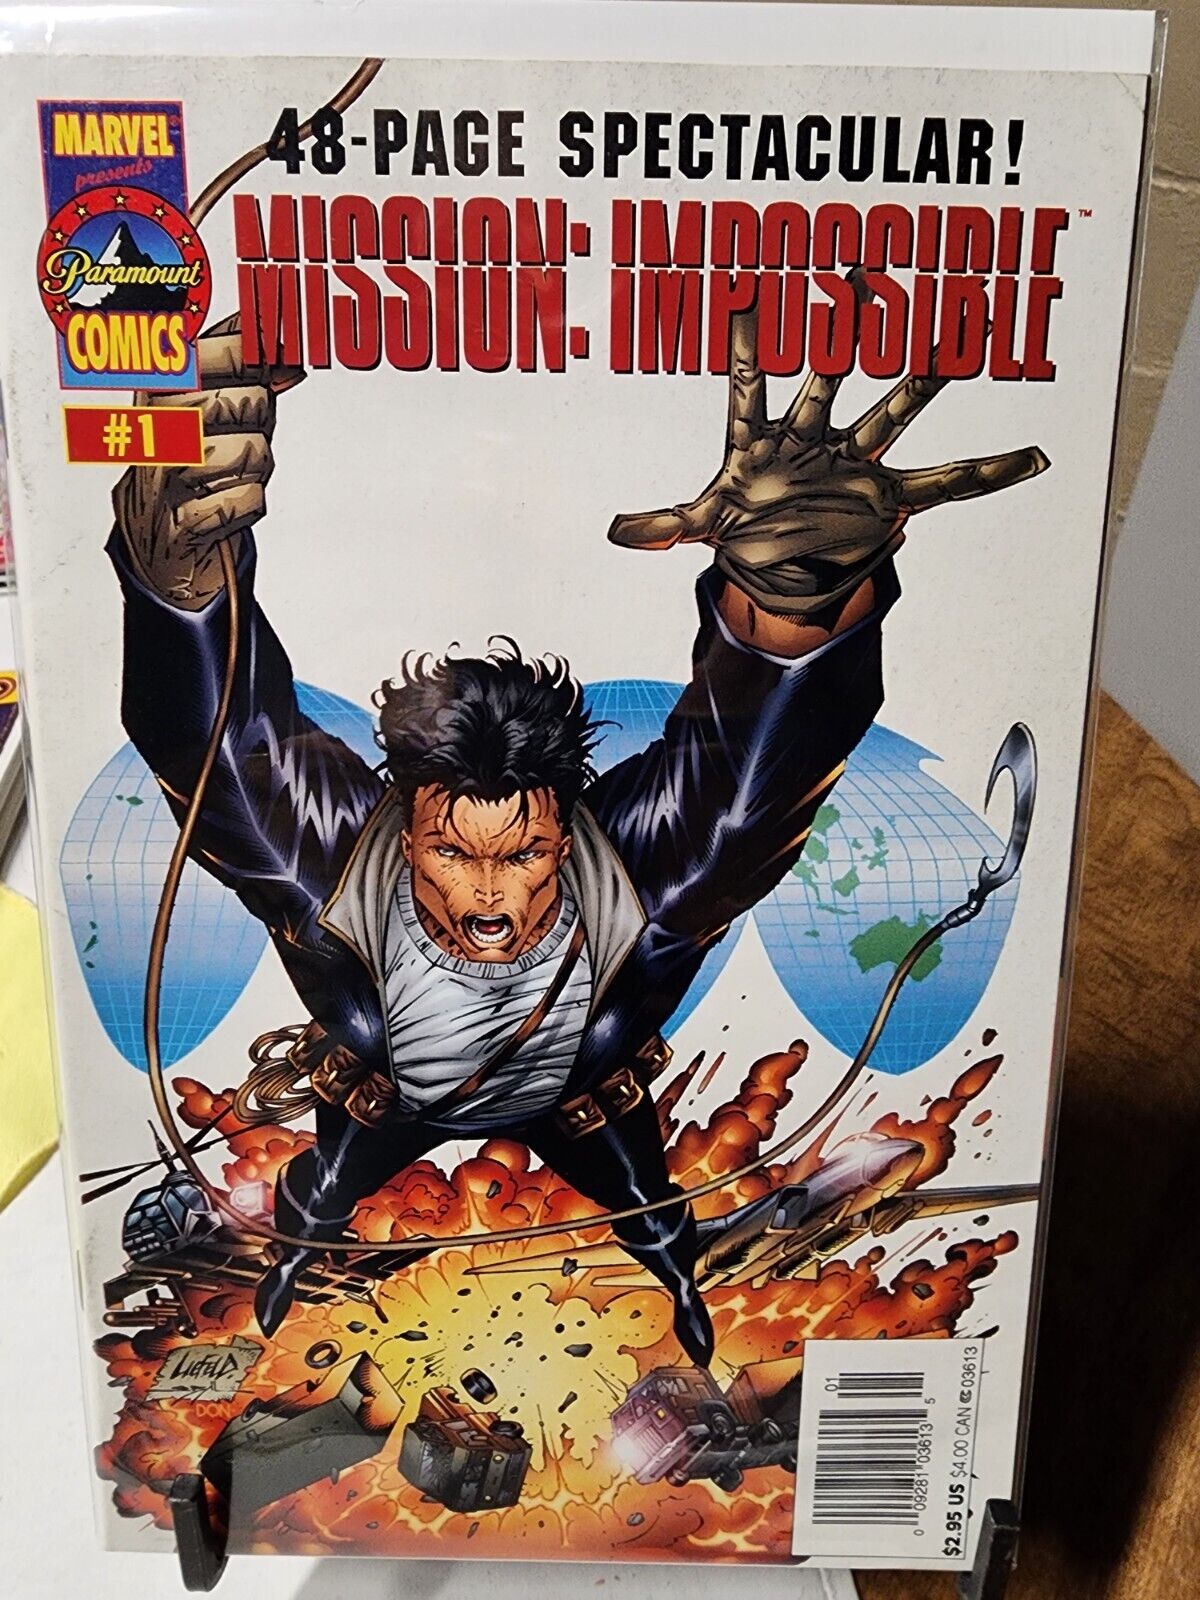 Mission Impossible #1 Error/Recalled Version - Key Issue